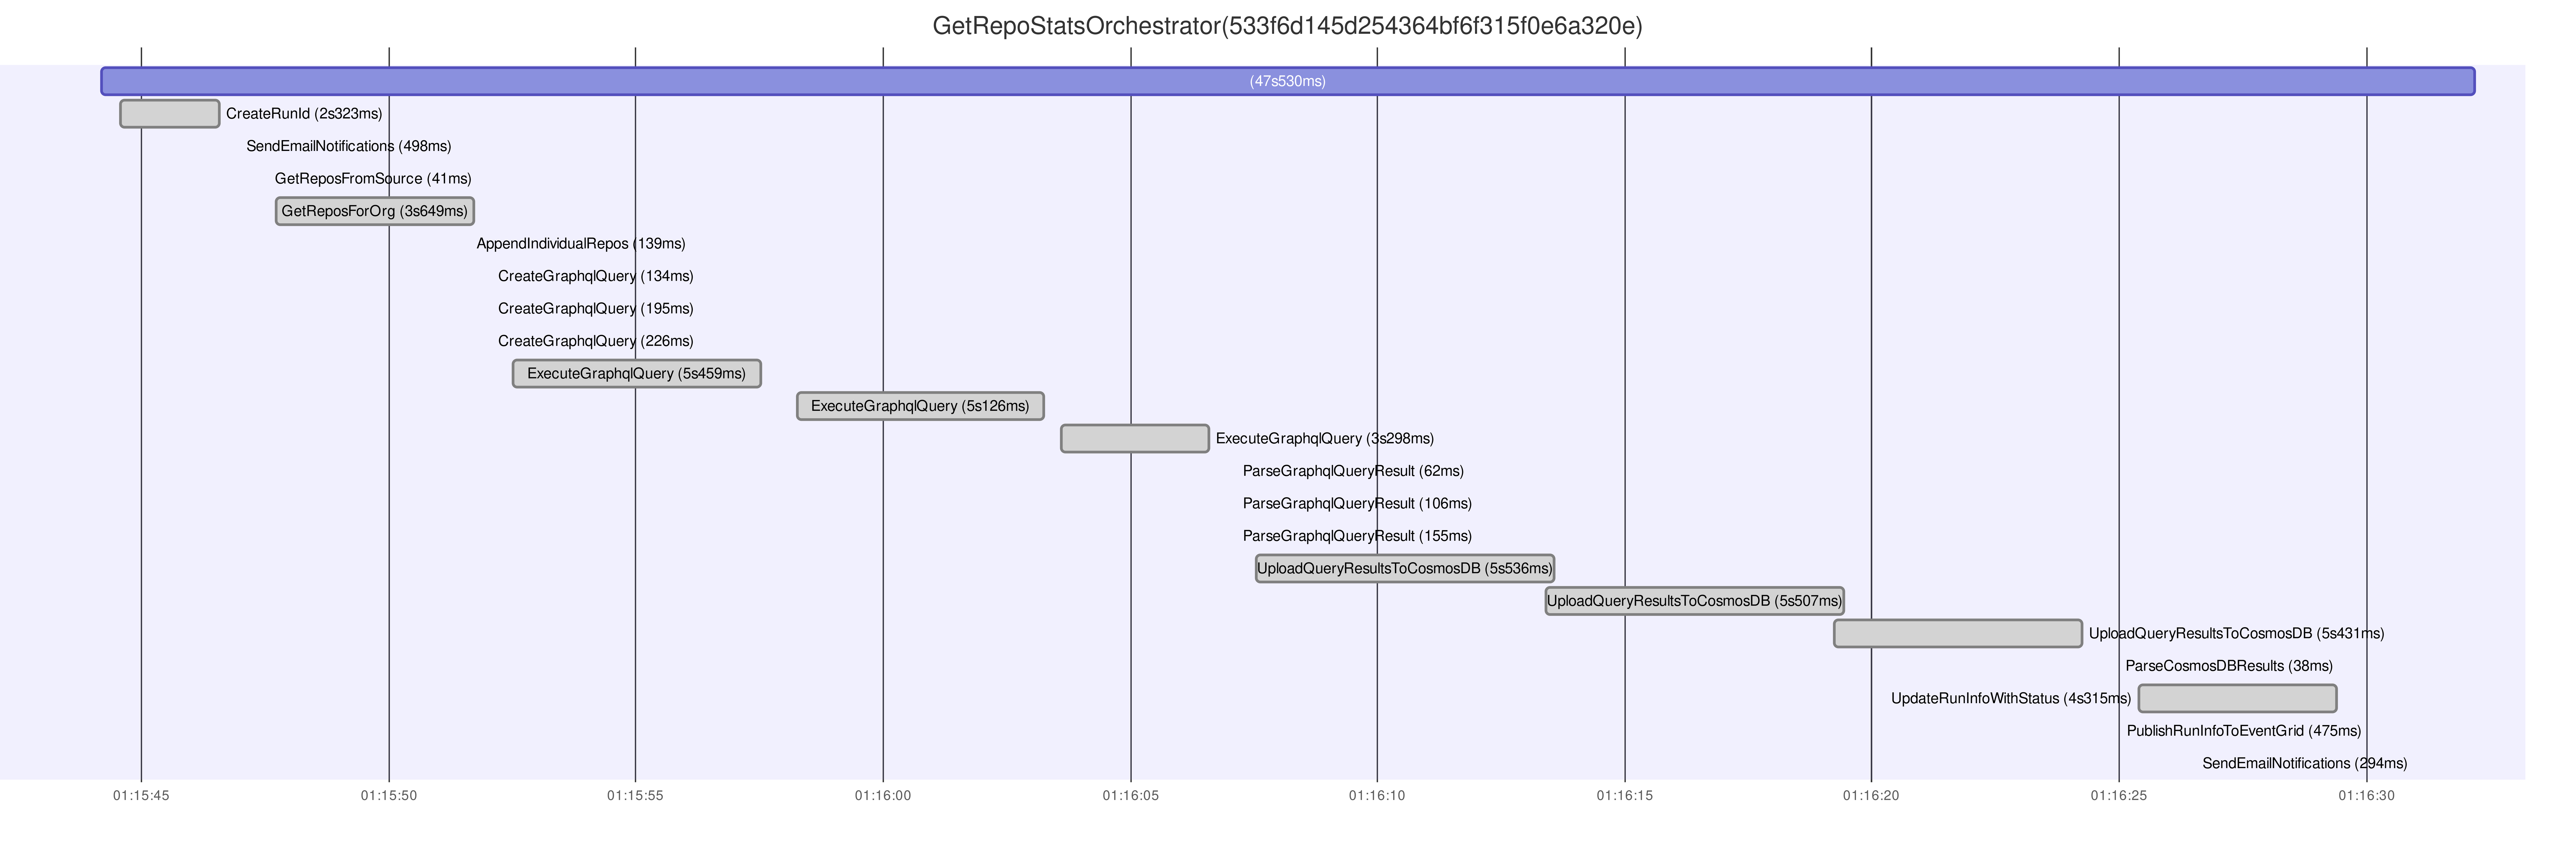 Gantt chart for processing 195 reports